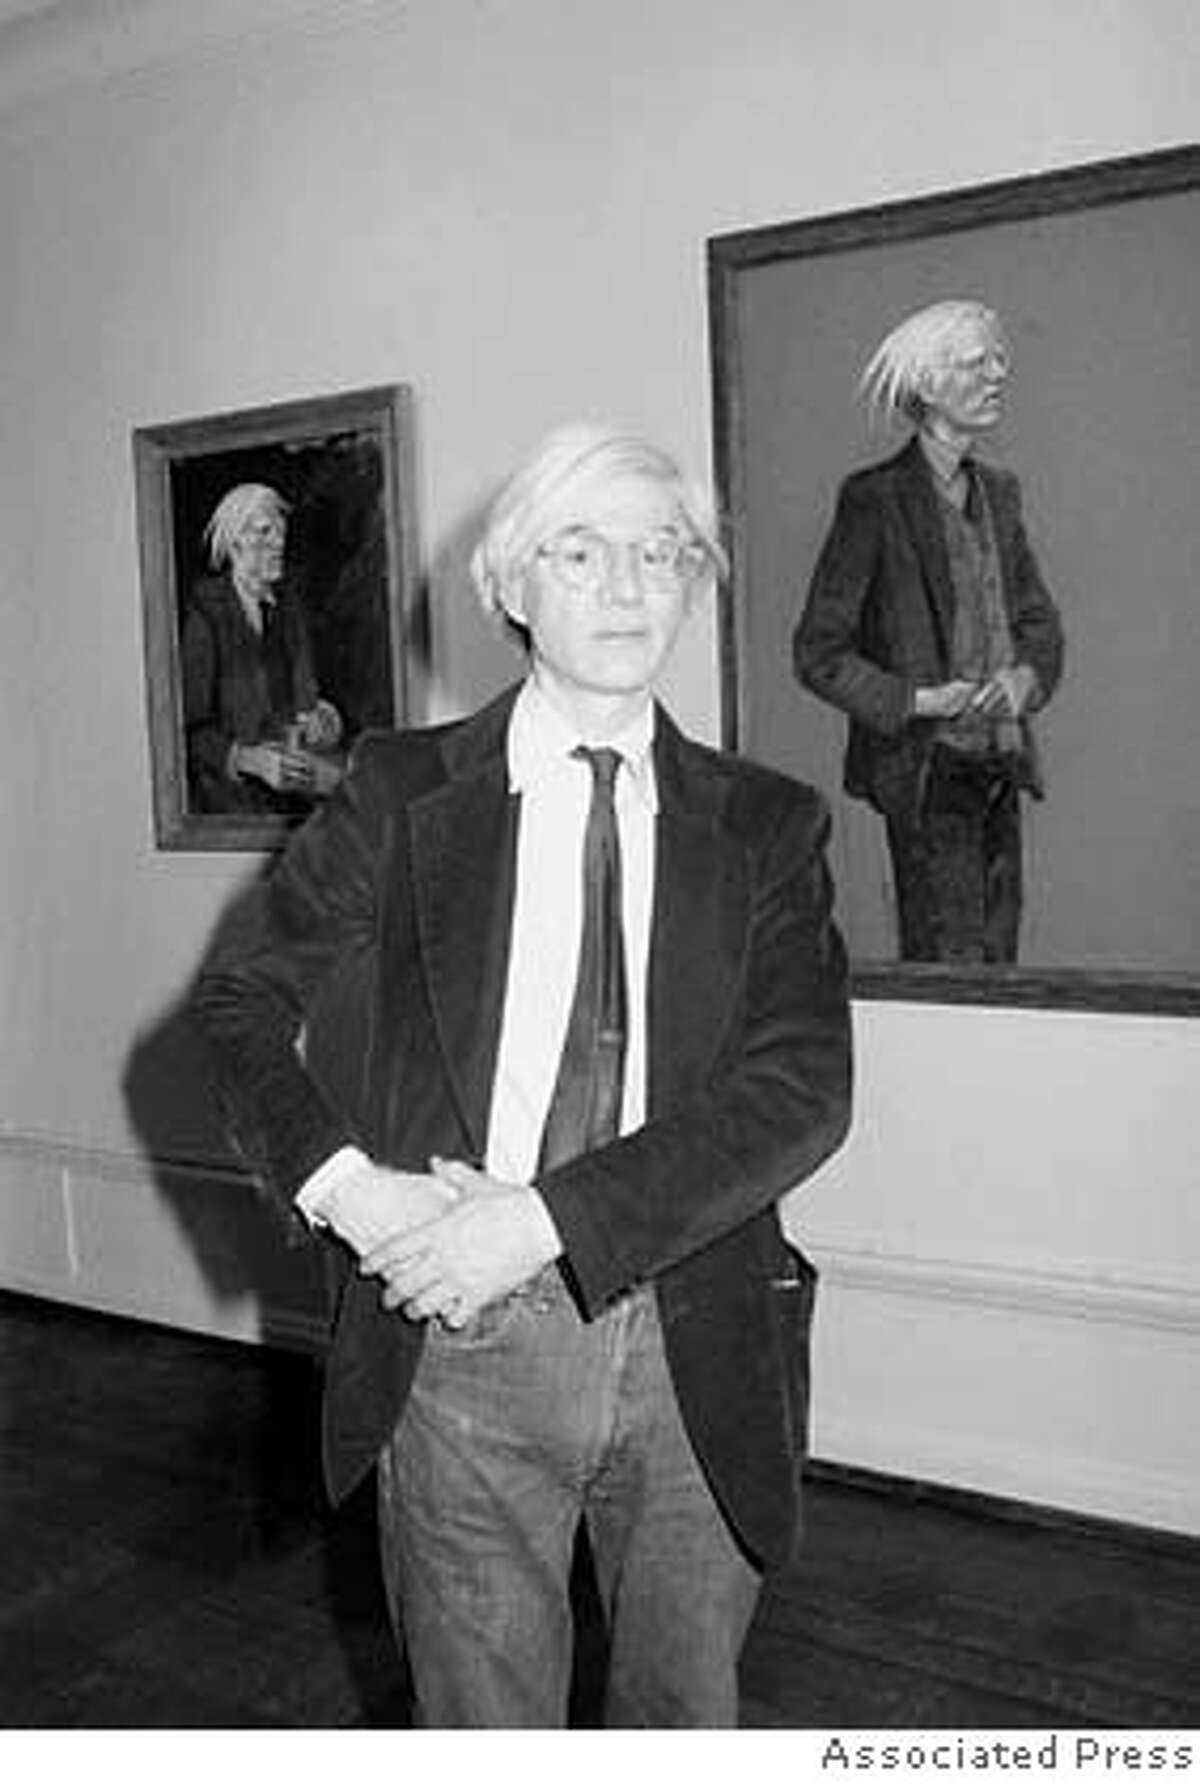 Andy Warhol art will adorn new Levi's line / Jeans and tops to feature  images of Marilyn Monroe and more